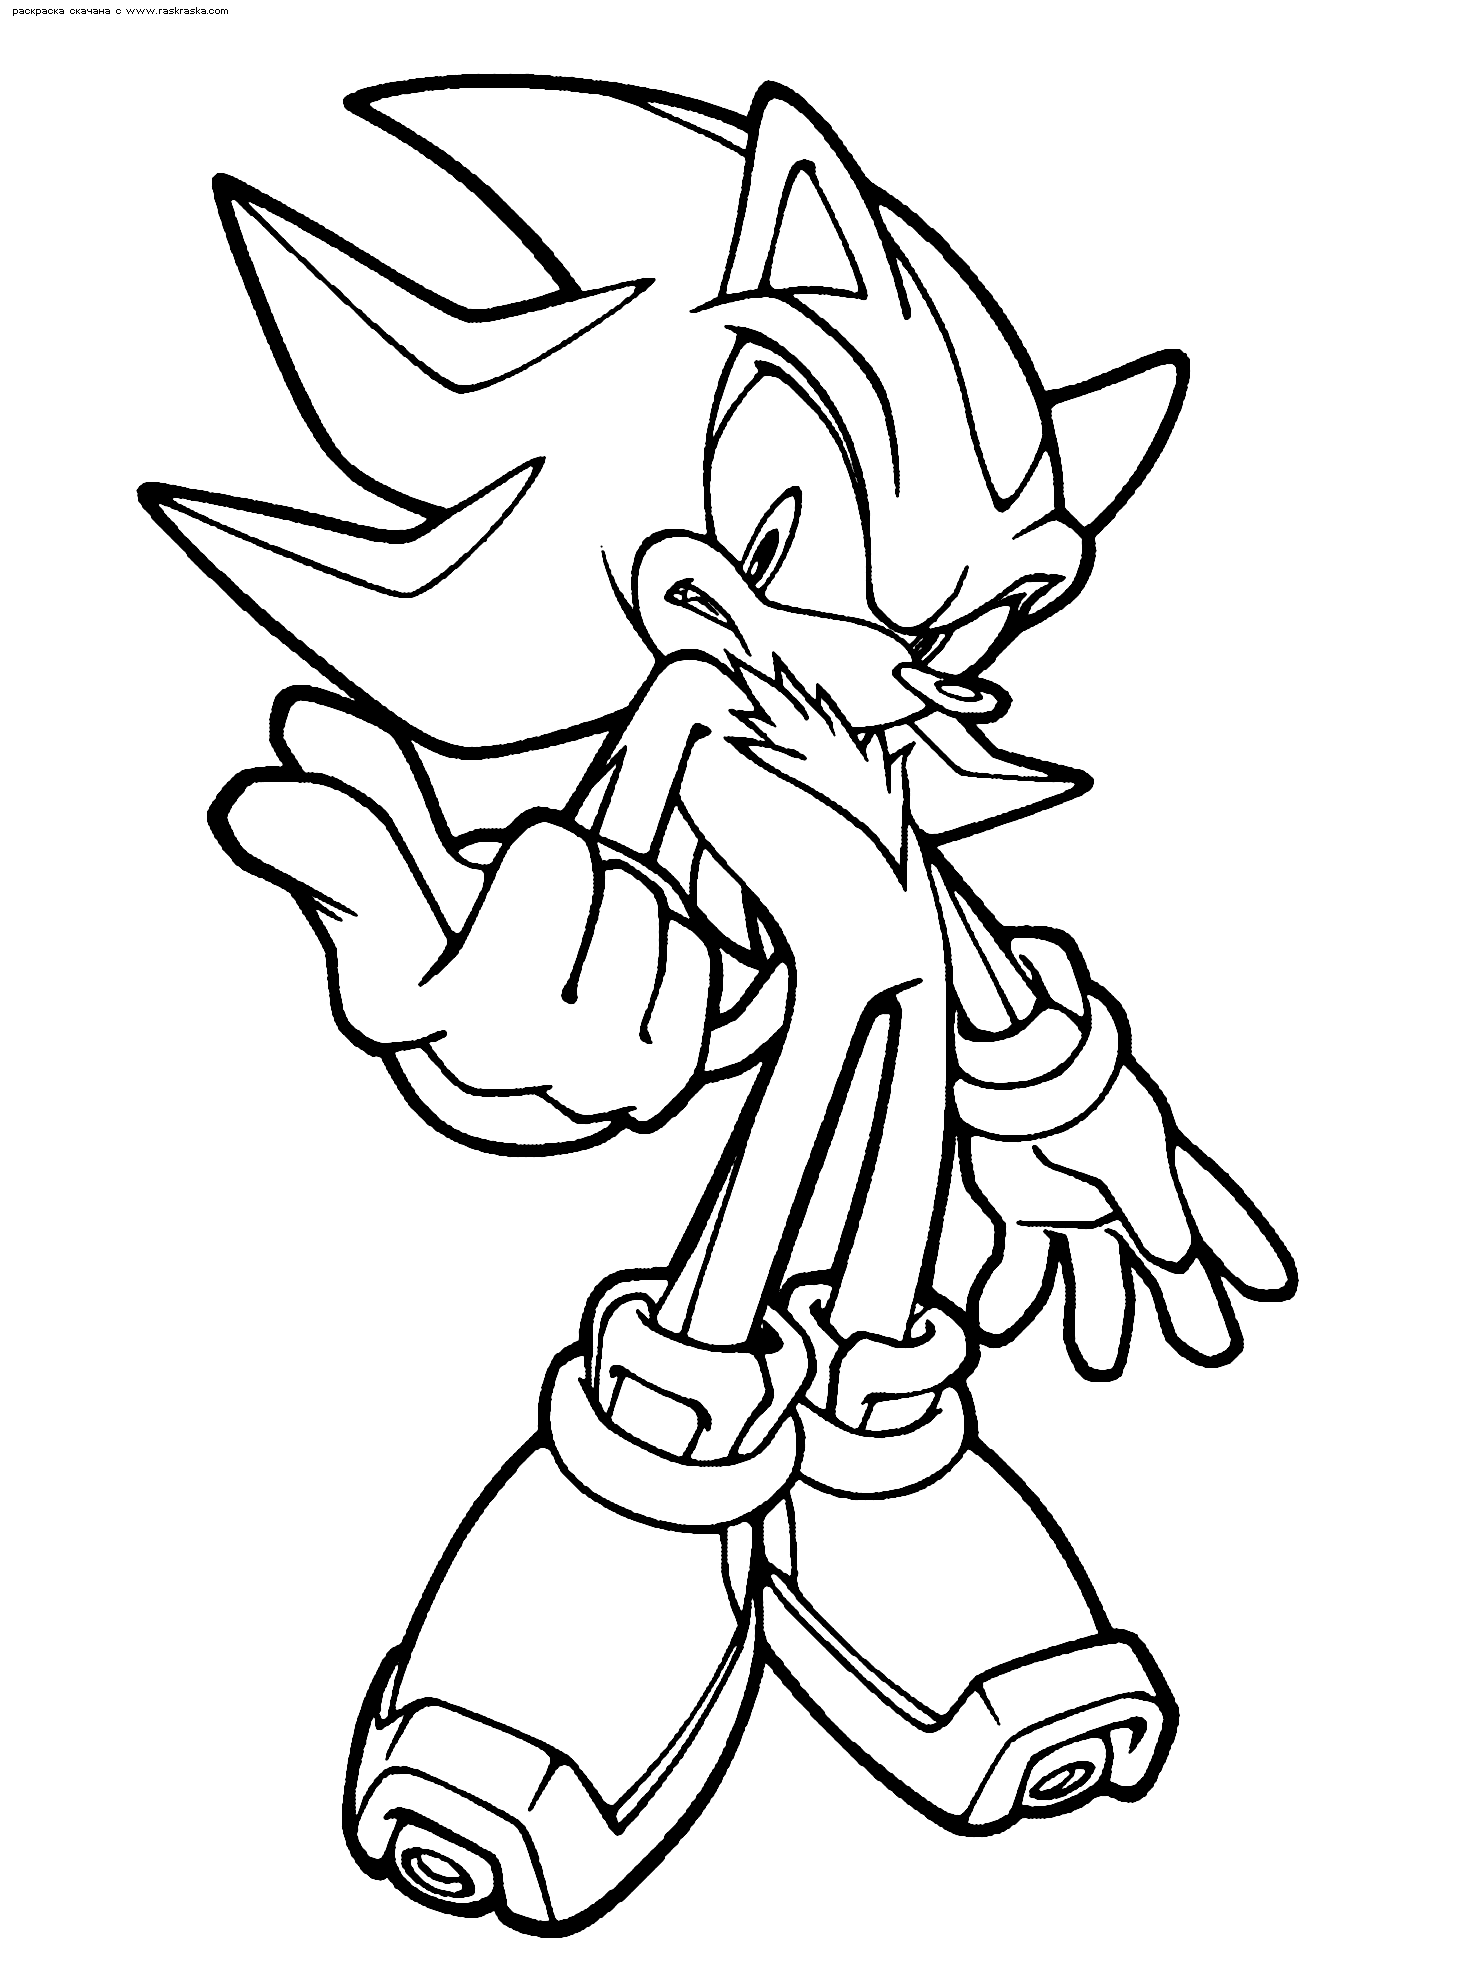 Coloring page: Sonic (Video Games) #153934 - Printable coloring pages